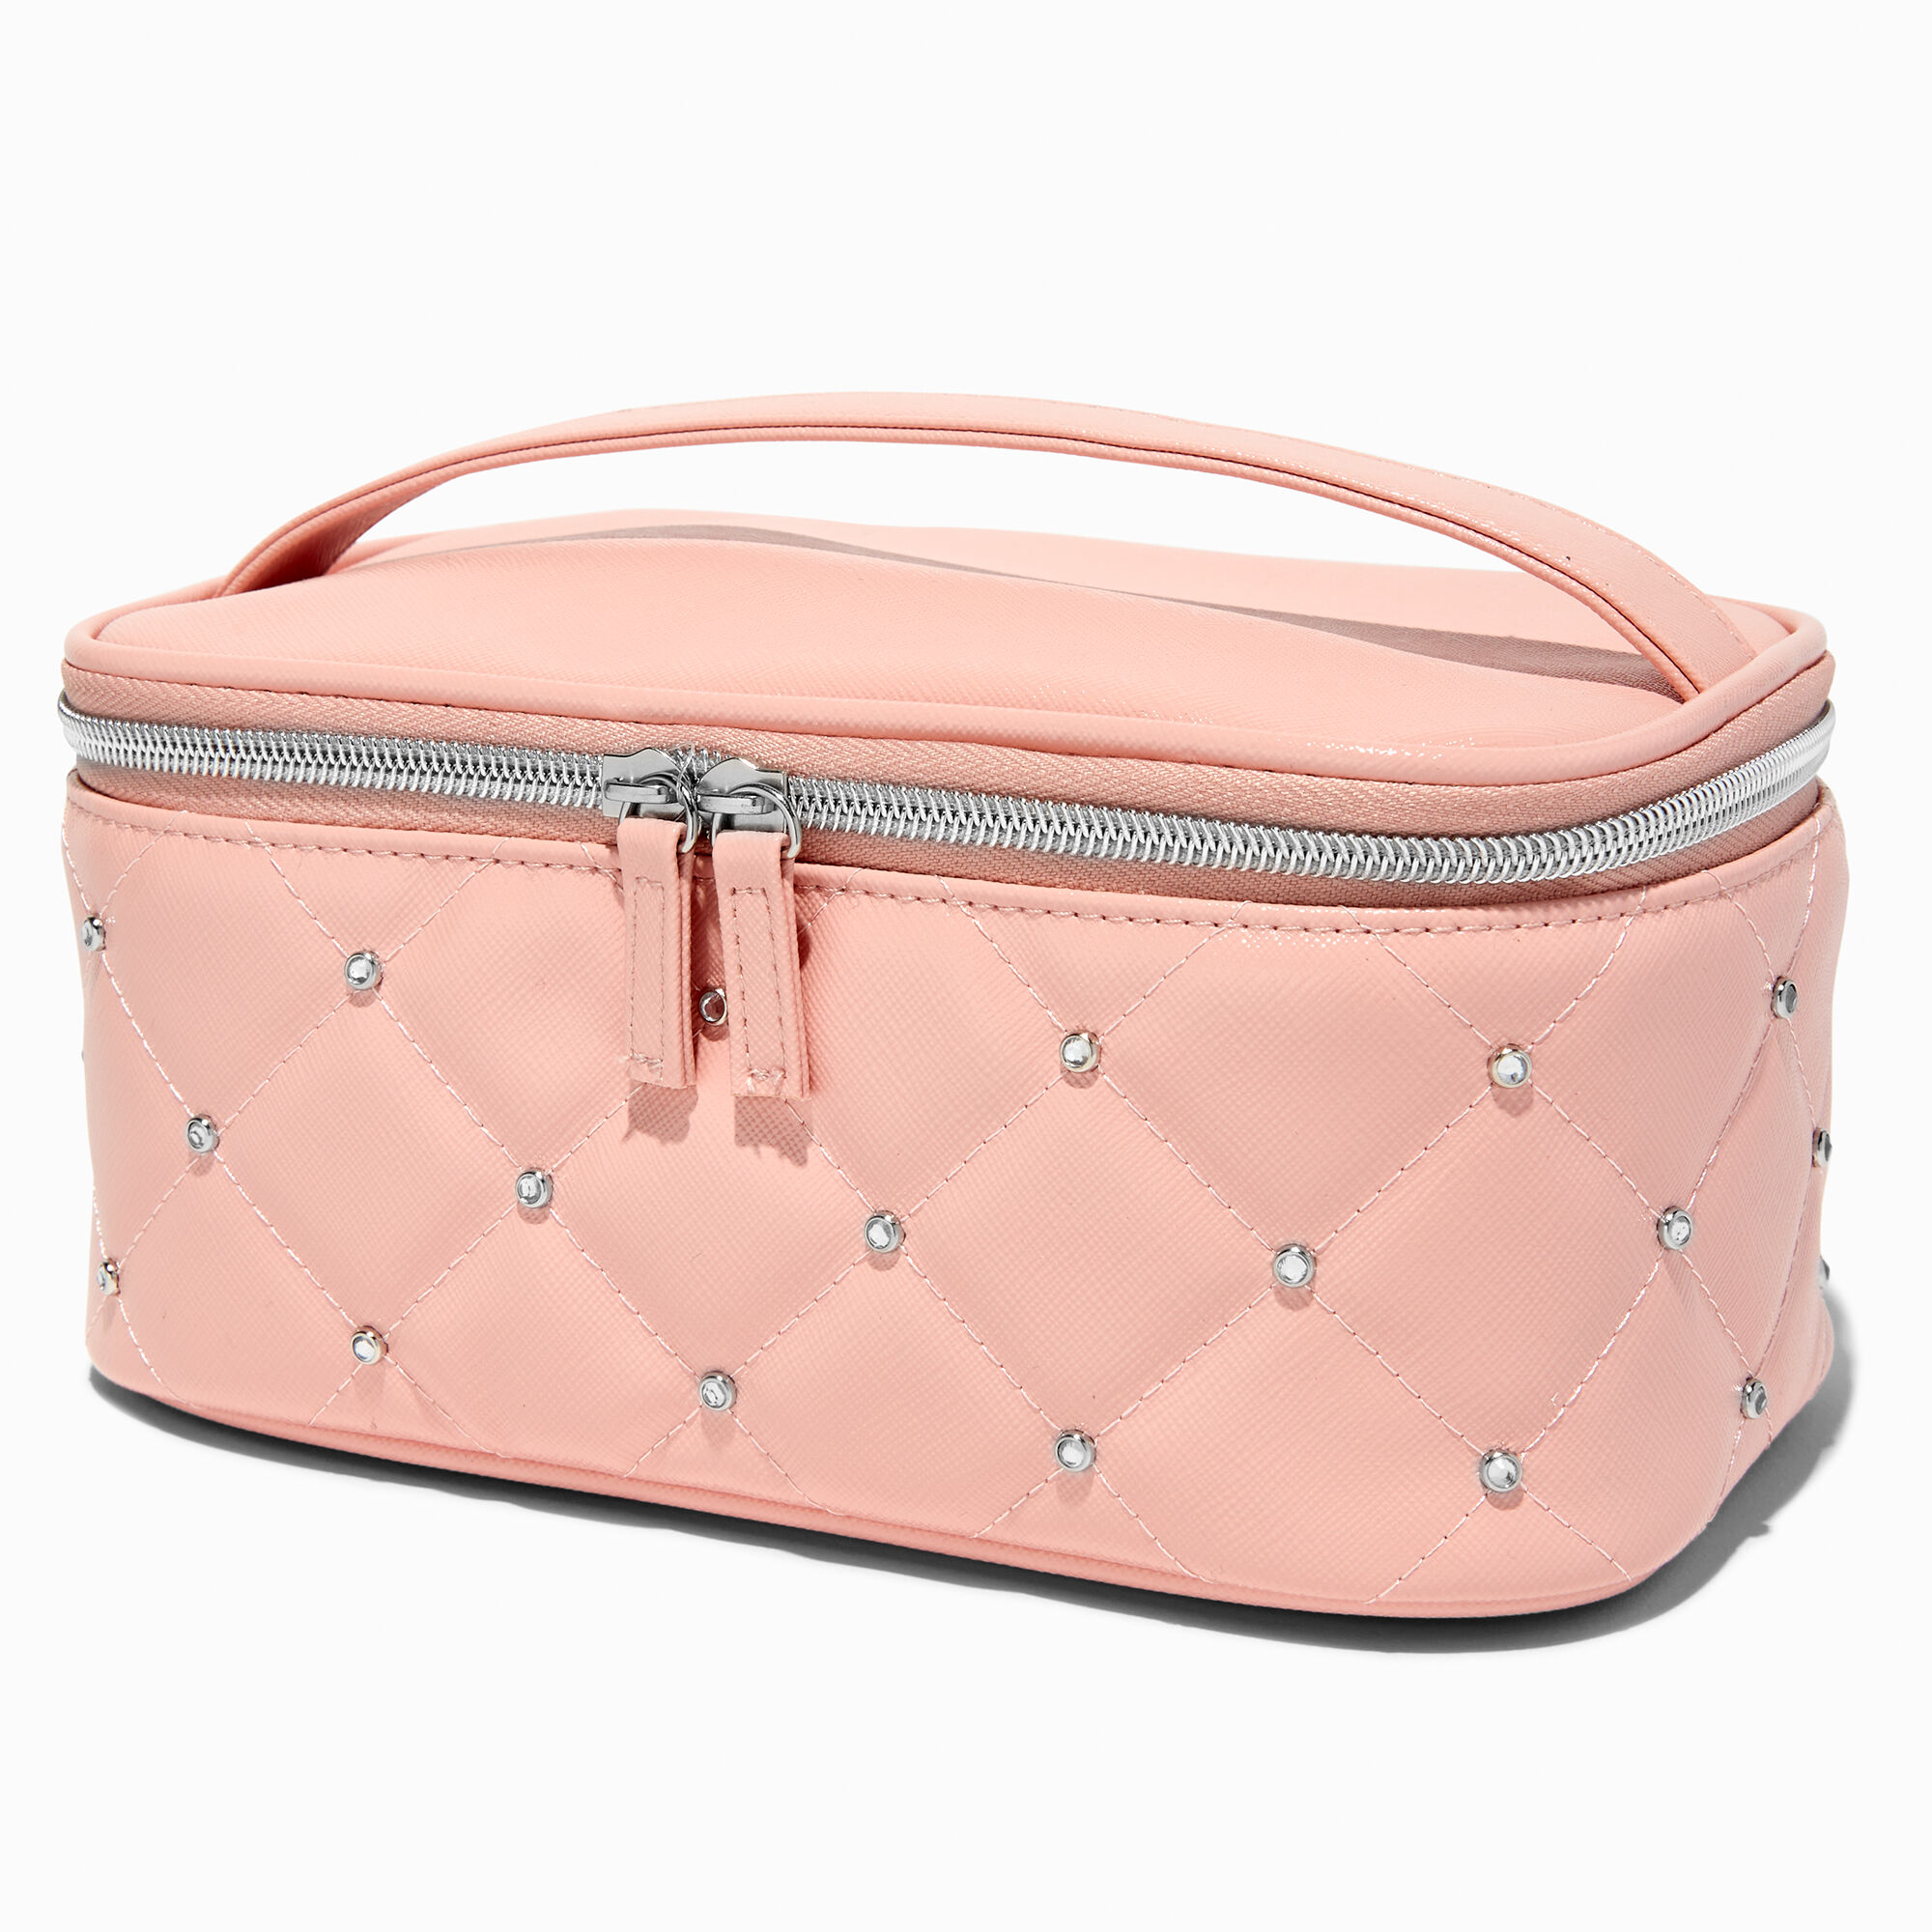 Makeup Bag for Women, Checkered Cosmetic Case, Travel Cosmetic Organizer  with Adjustable Dividers, Pink - Walmart.com